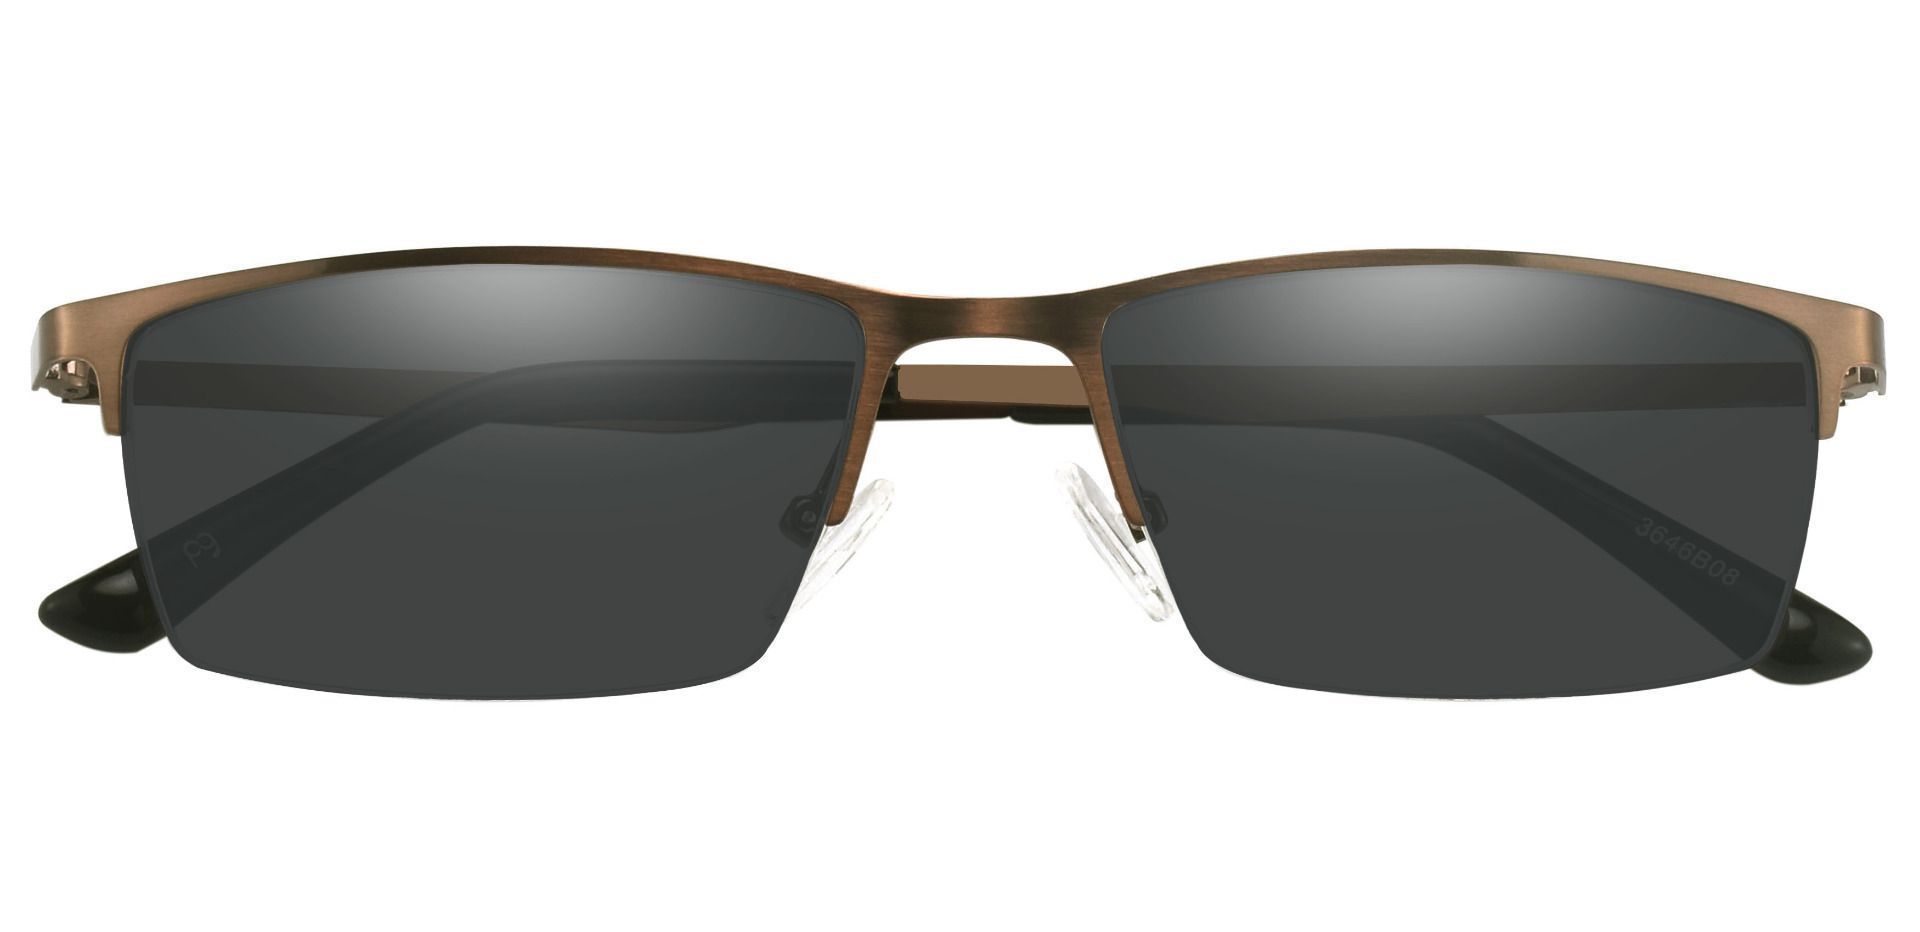 Lombard Rectangle Prescription Sunglasses - Brown Frame With Gray Lenses